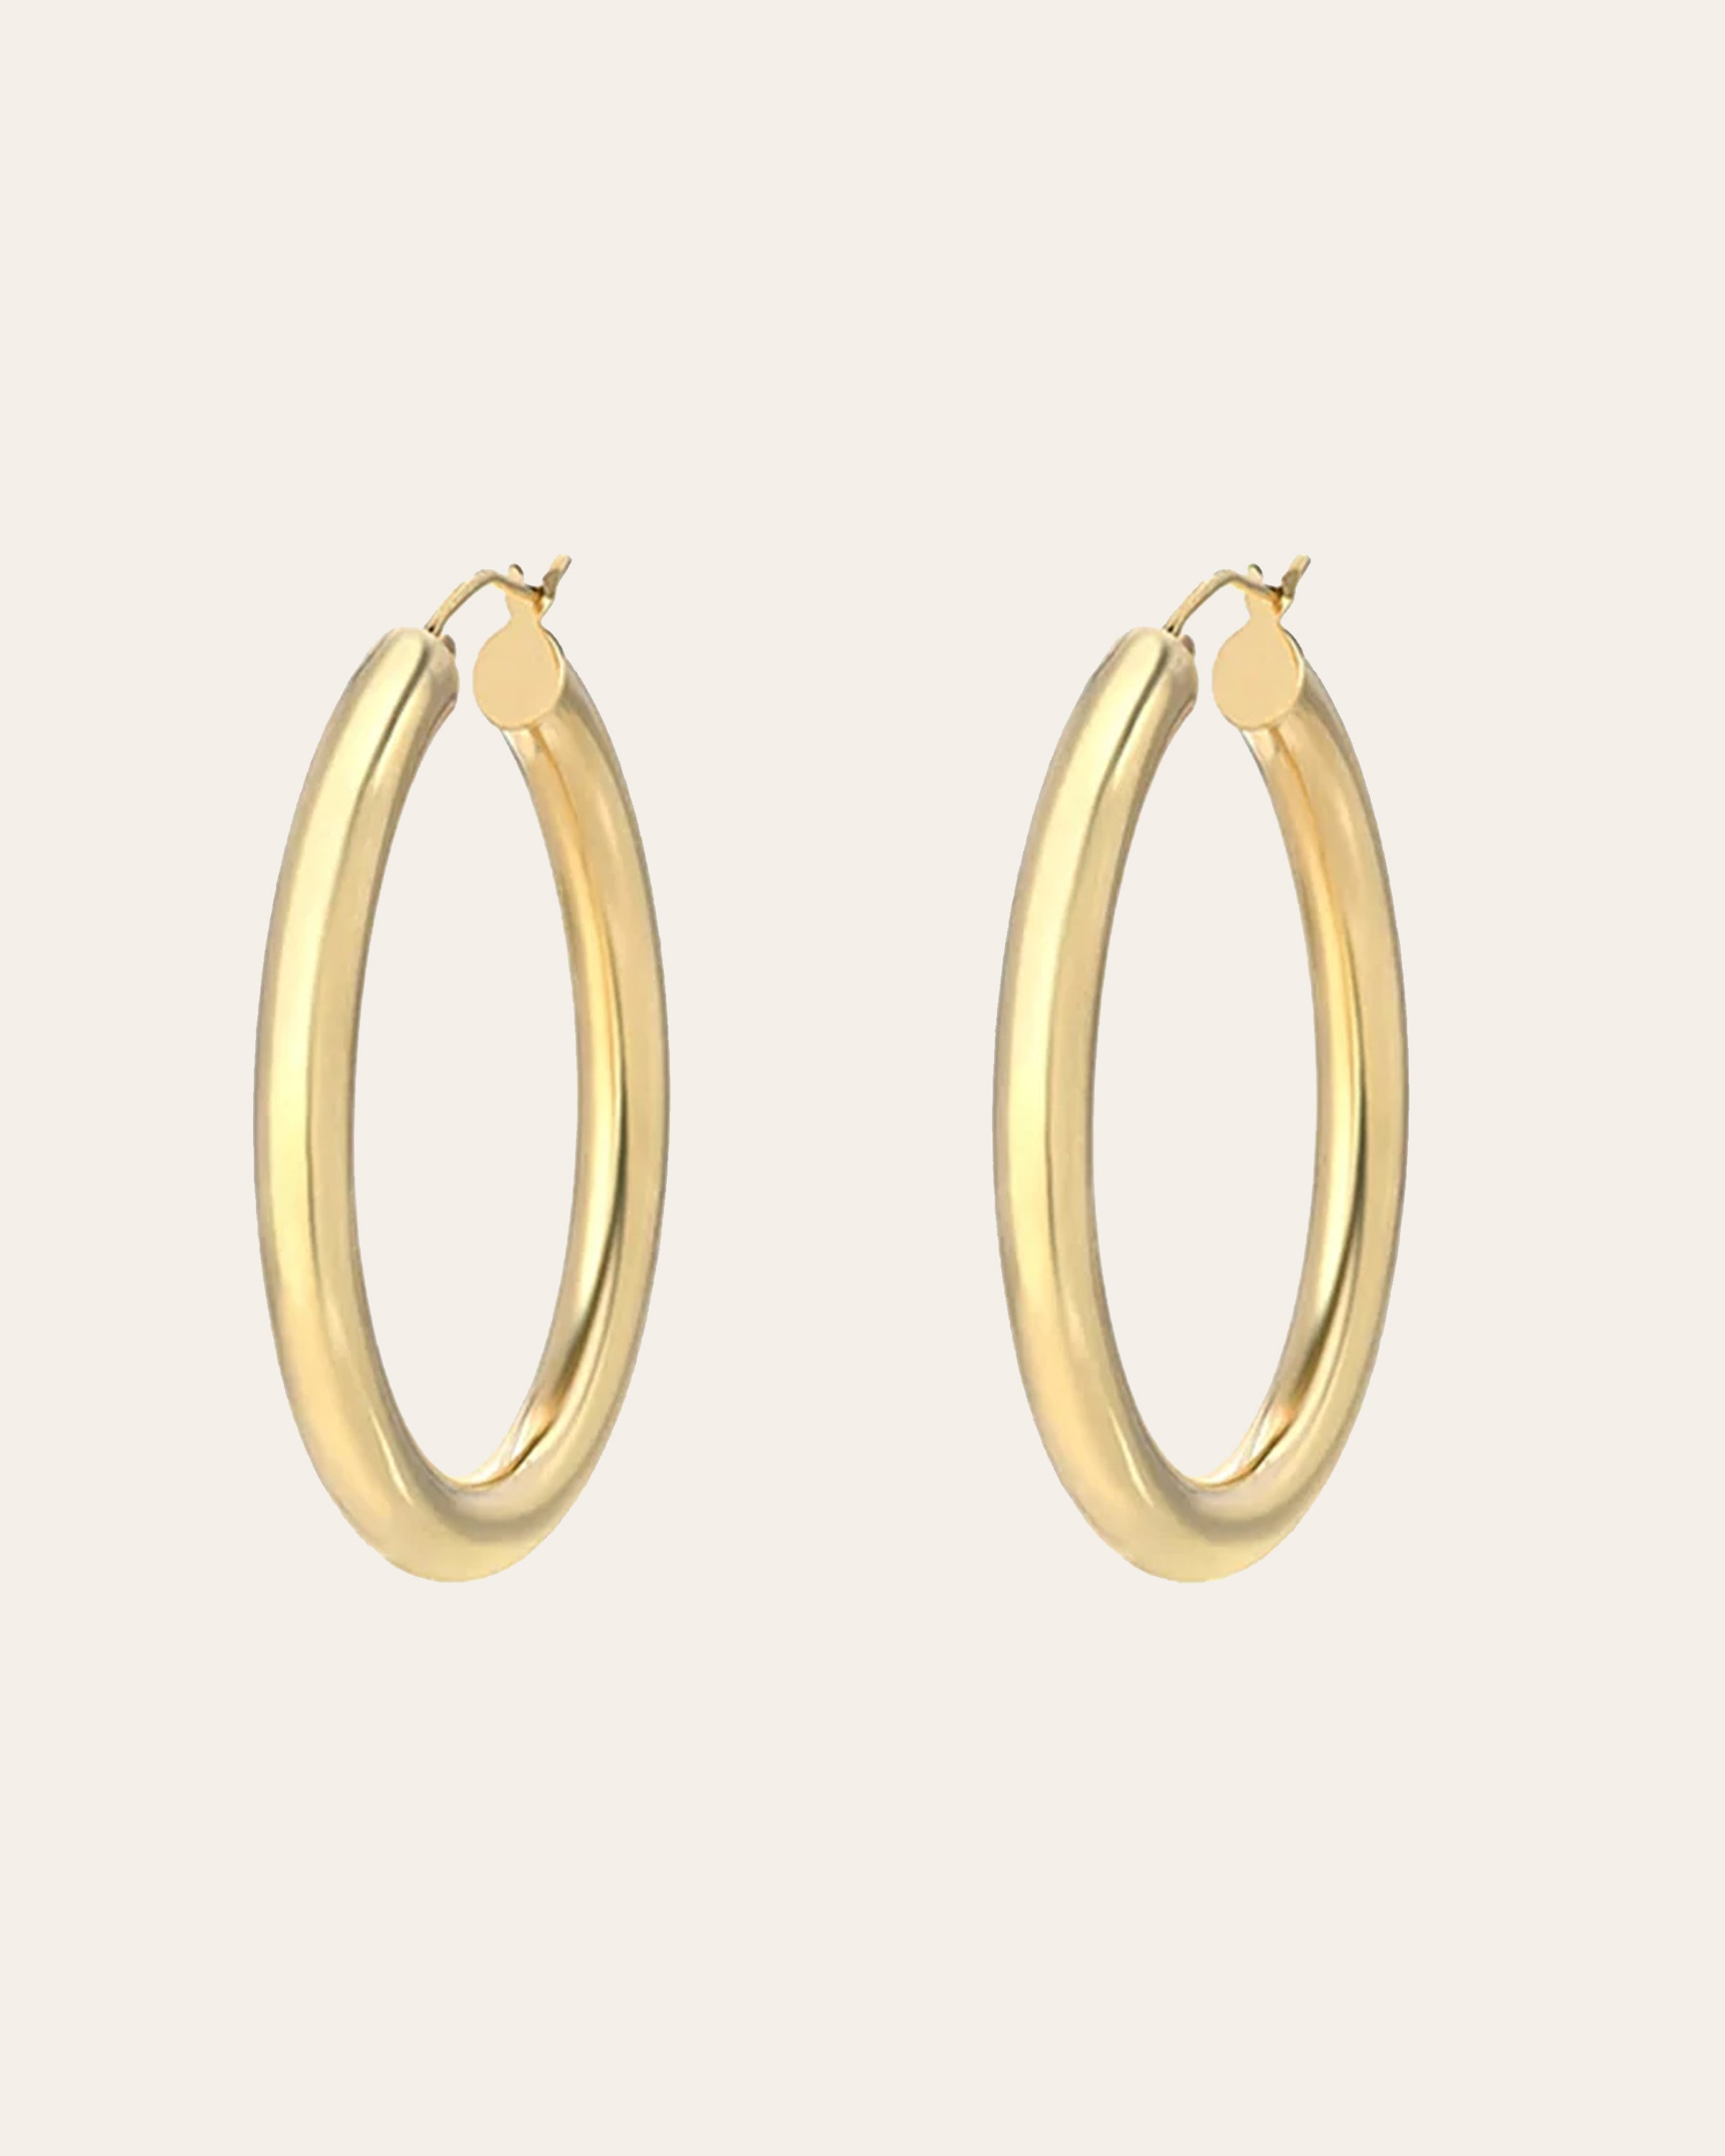 These  hoop earrings are my go-to accessory